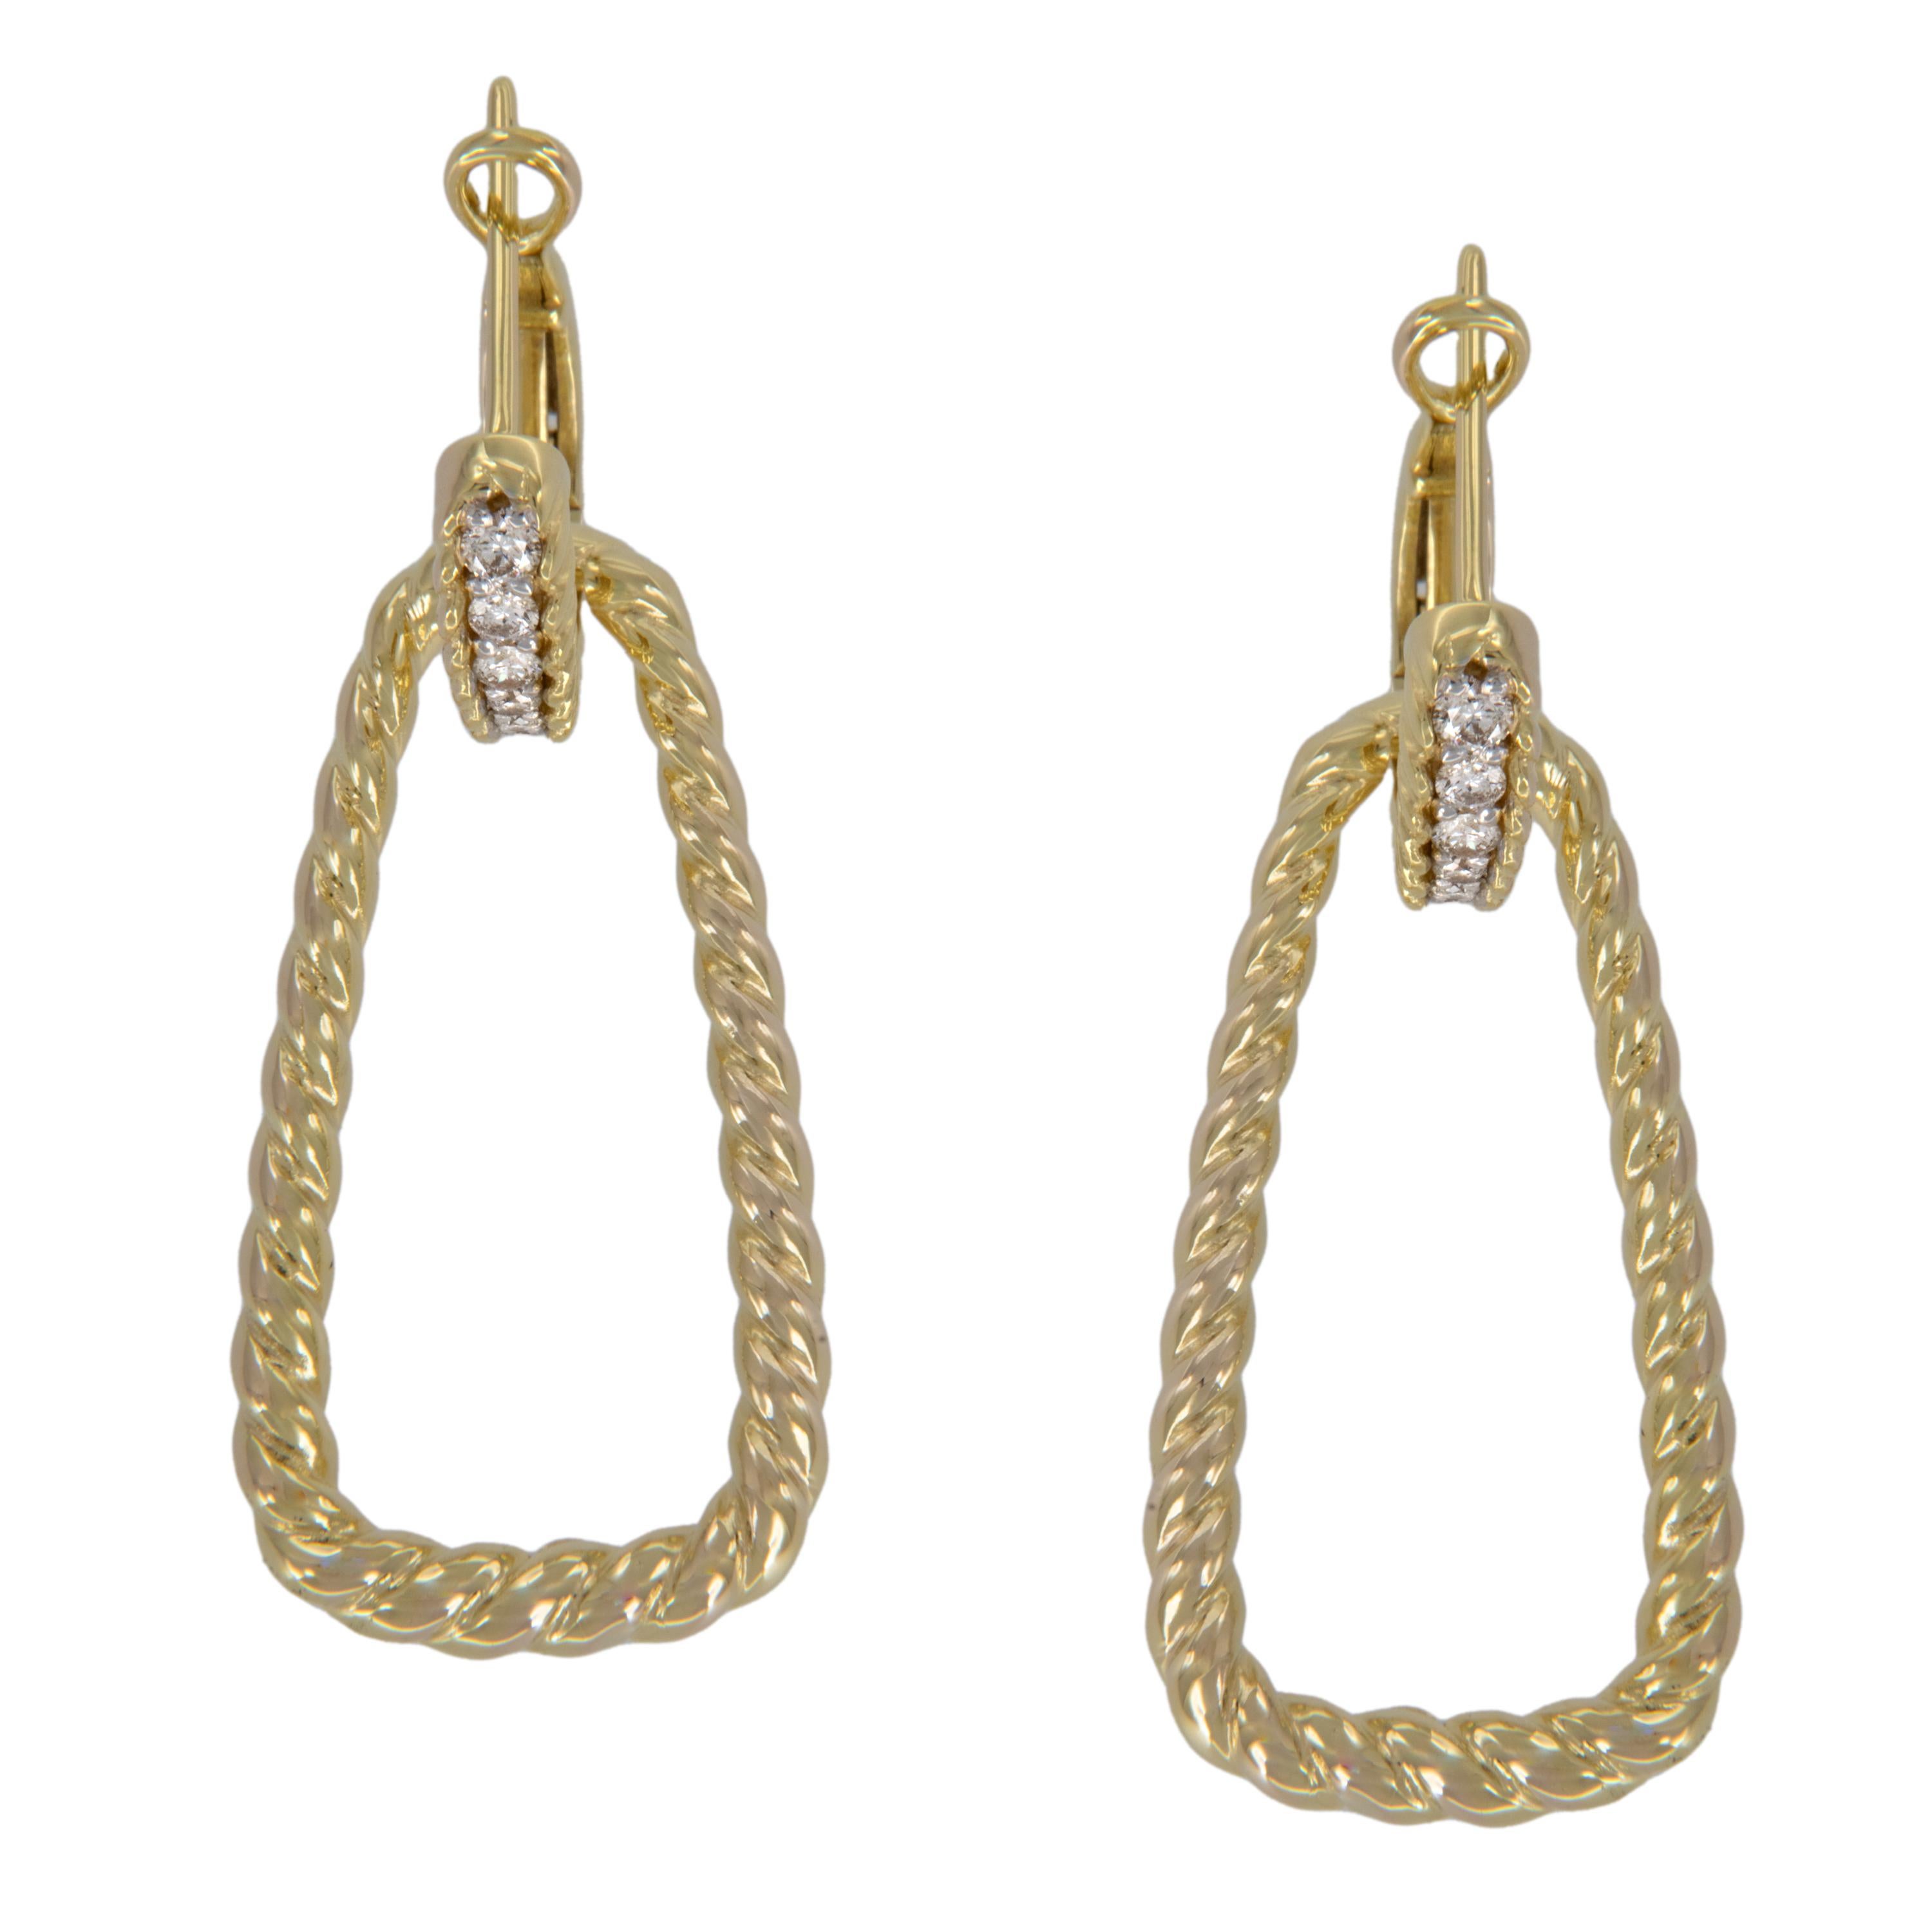 Make a statement with this timeless style of twisted gold door knocker shaped earrings! They are elegant yet classic enough to be worn as your favorite everyday pair. Perfectly set off with 0.20 Cttw fine diamonds at the top, these will be your go